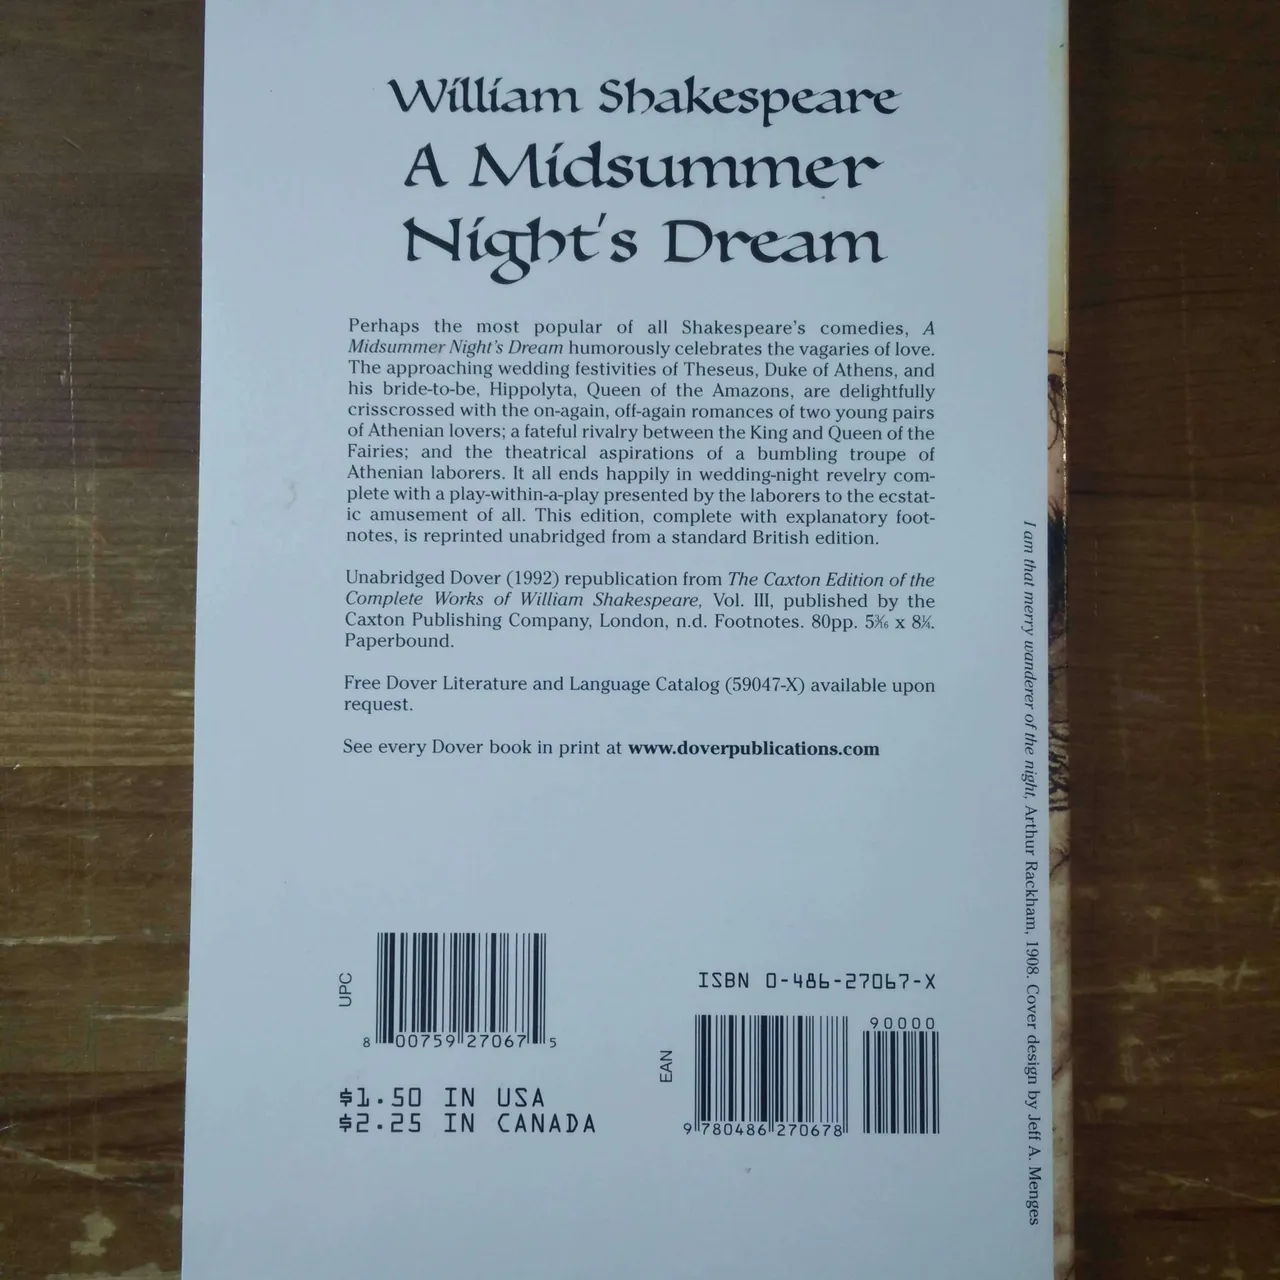 A Midsummer Night's Dream by William Shakespeare photo 3